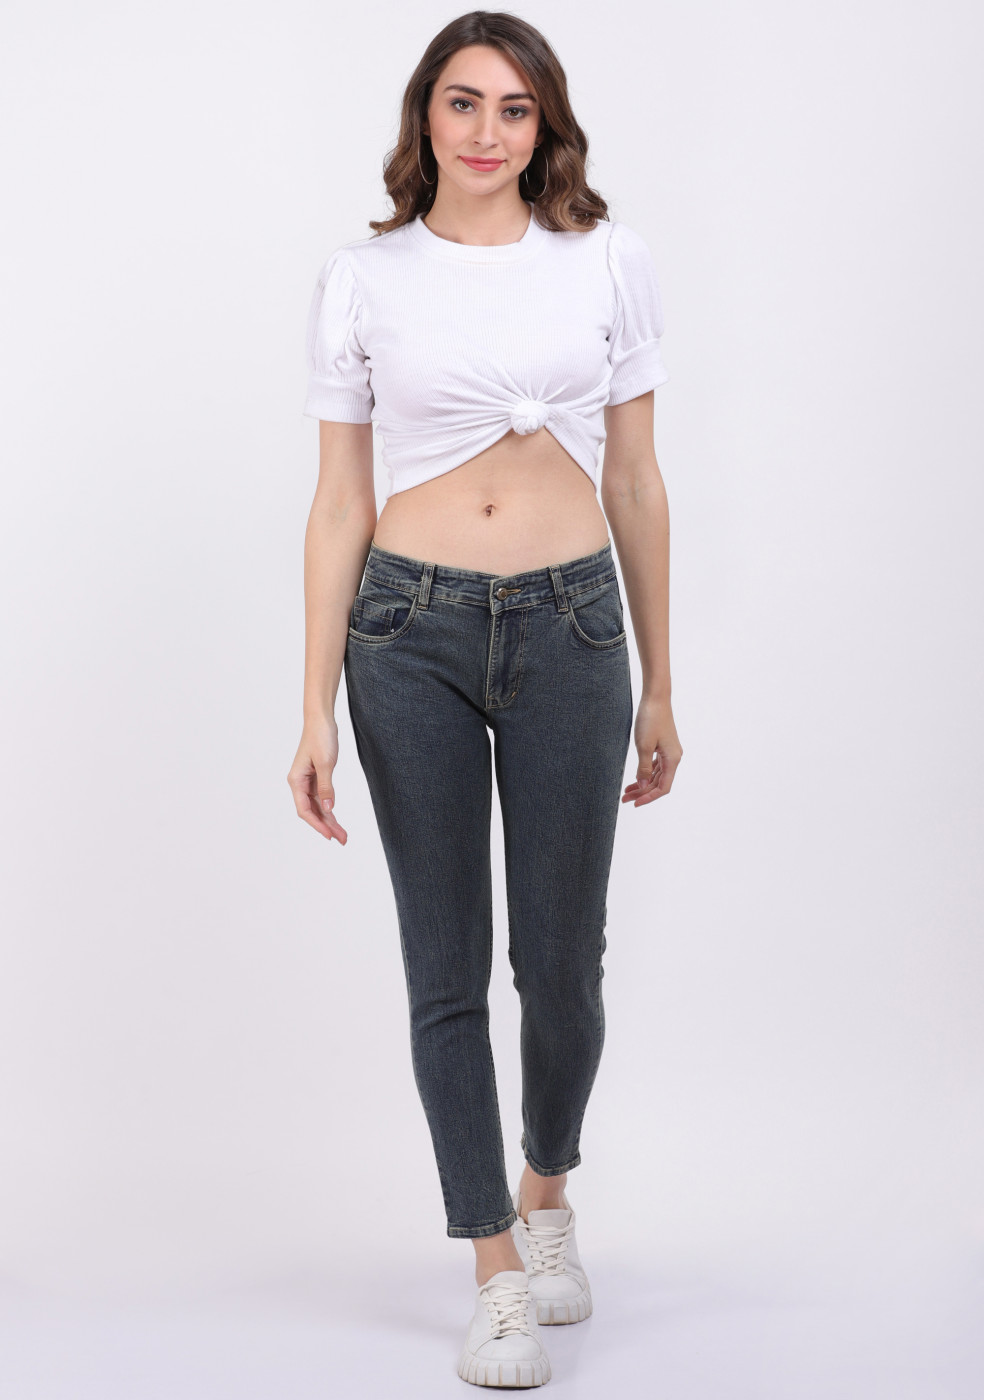 TINT Comfortable Jeans For Women